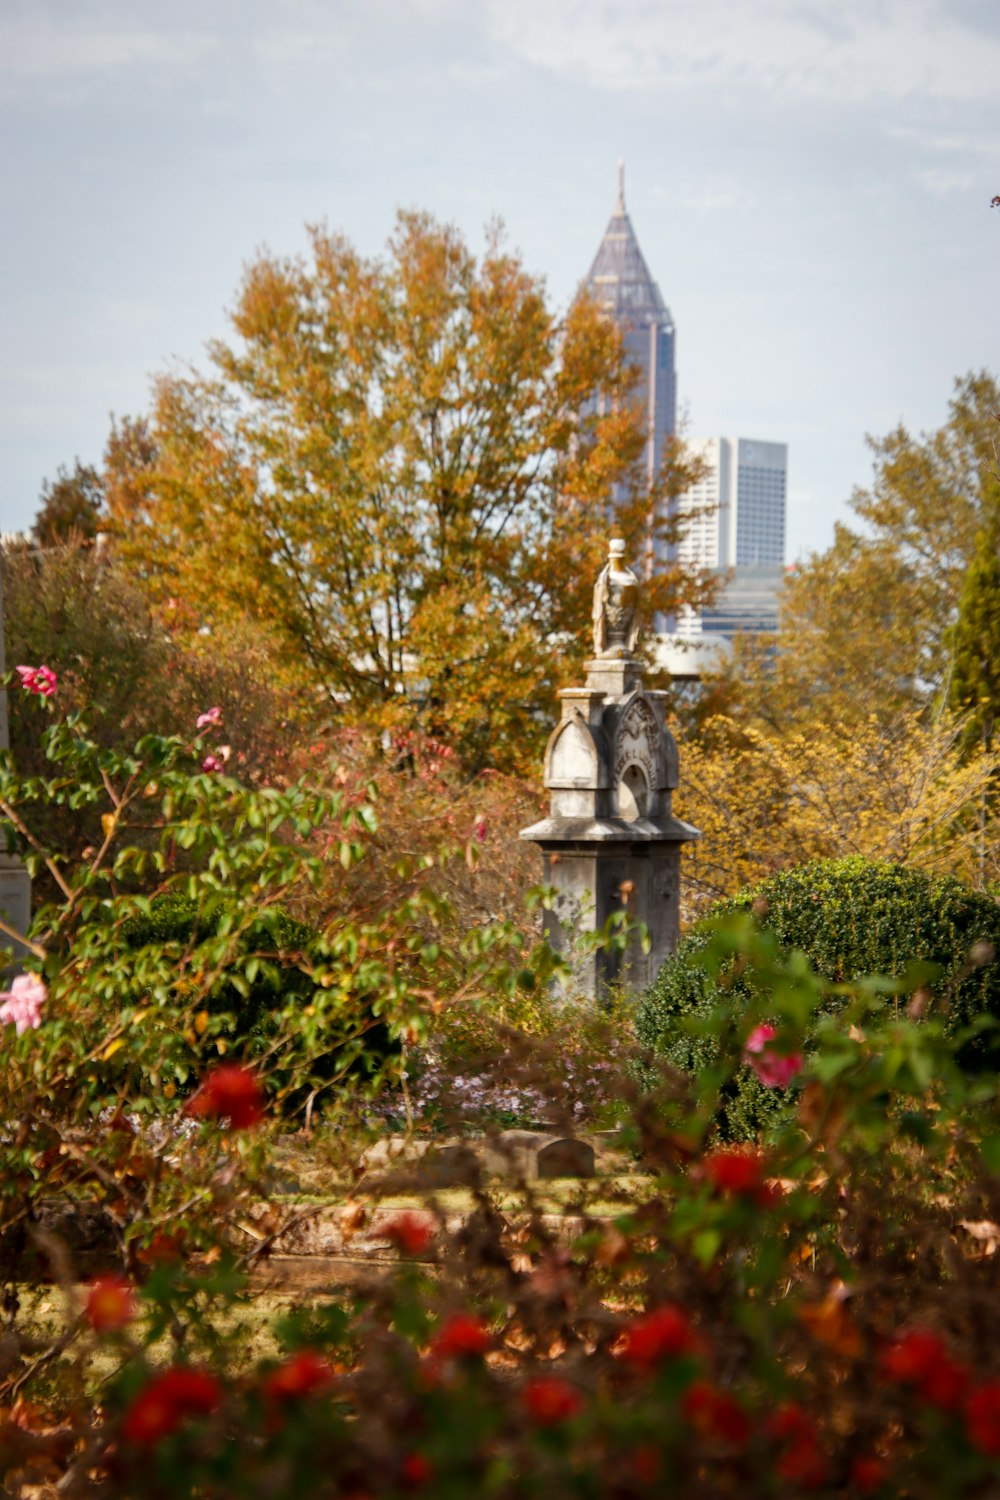 a statue in the middle of a garden with a city in the background